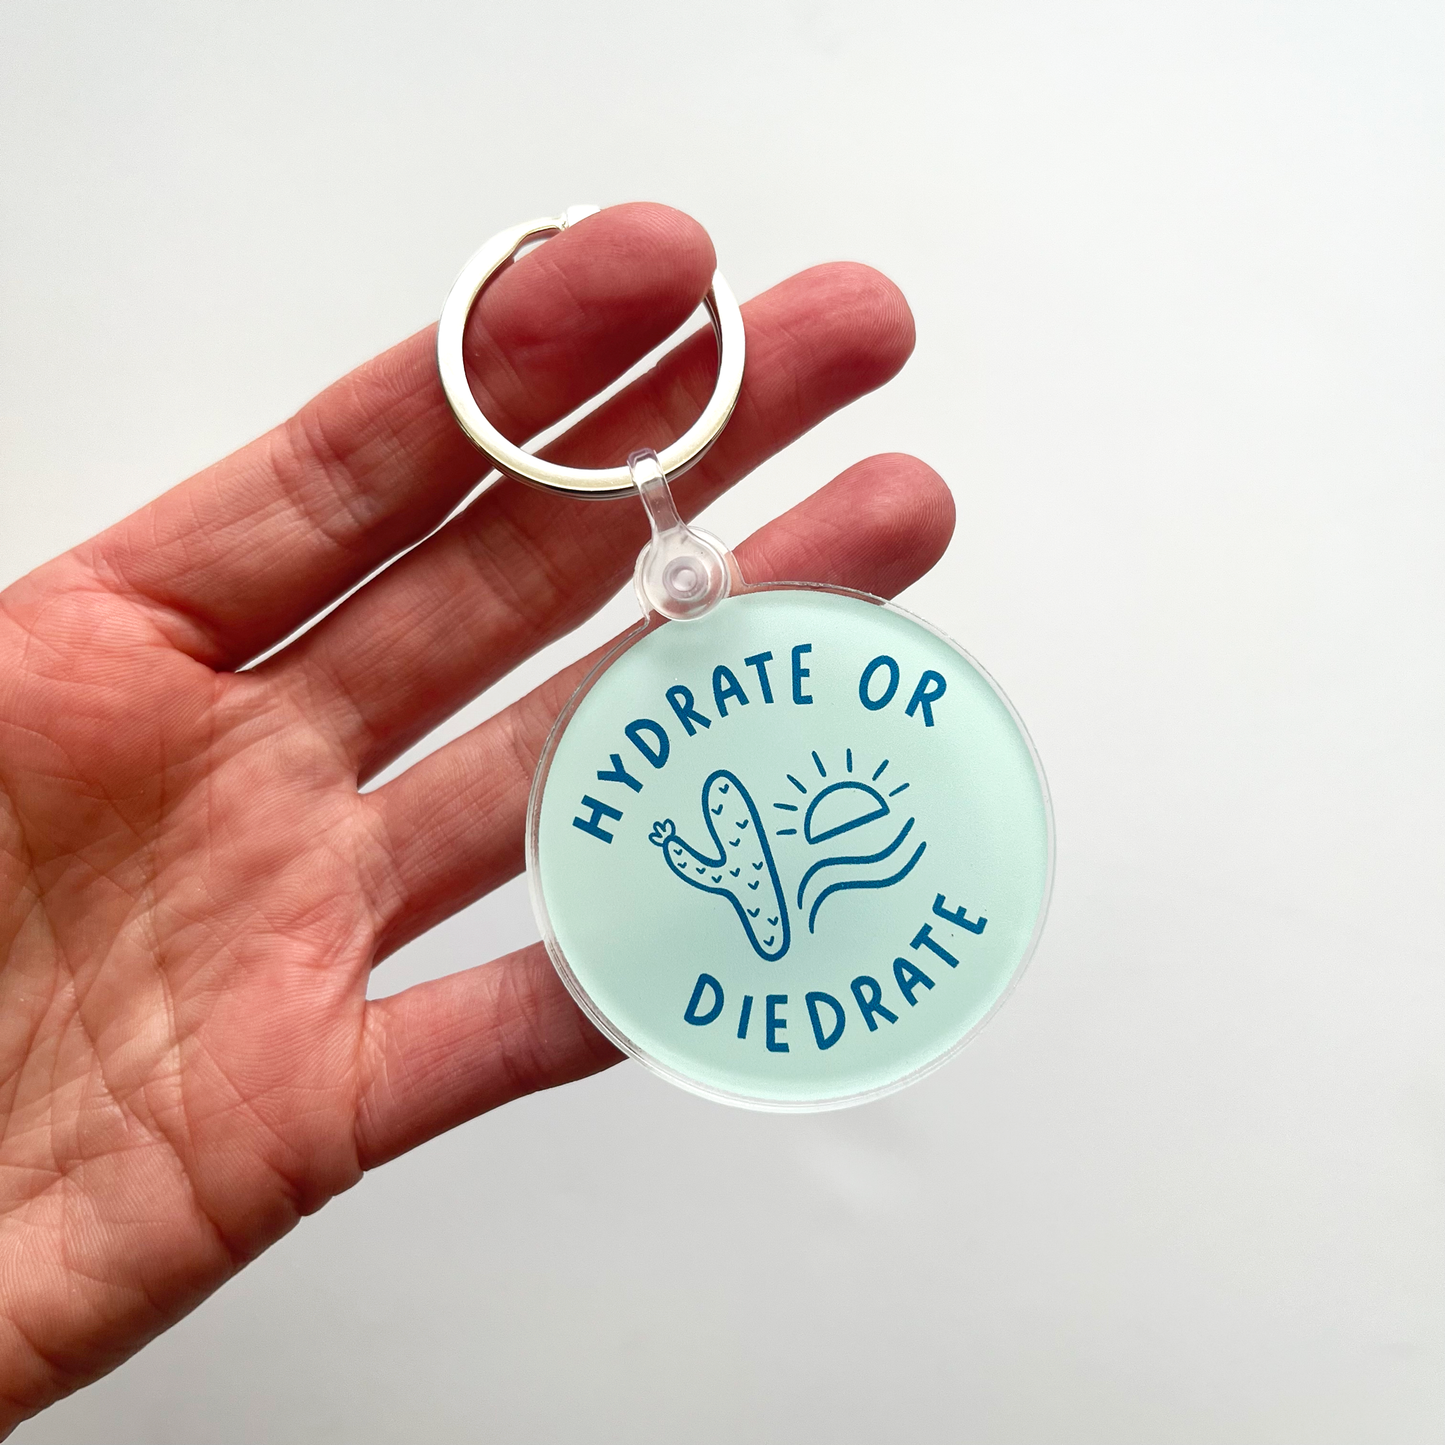 blue circle keychain with dark blue text saying hydrate or diedrate. Cactus and a sun are doodled in the middle of the circle.